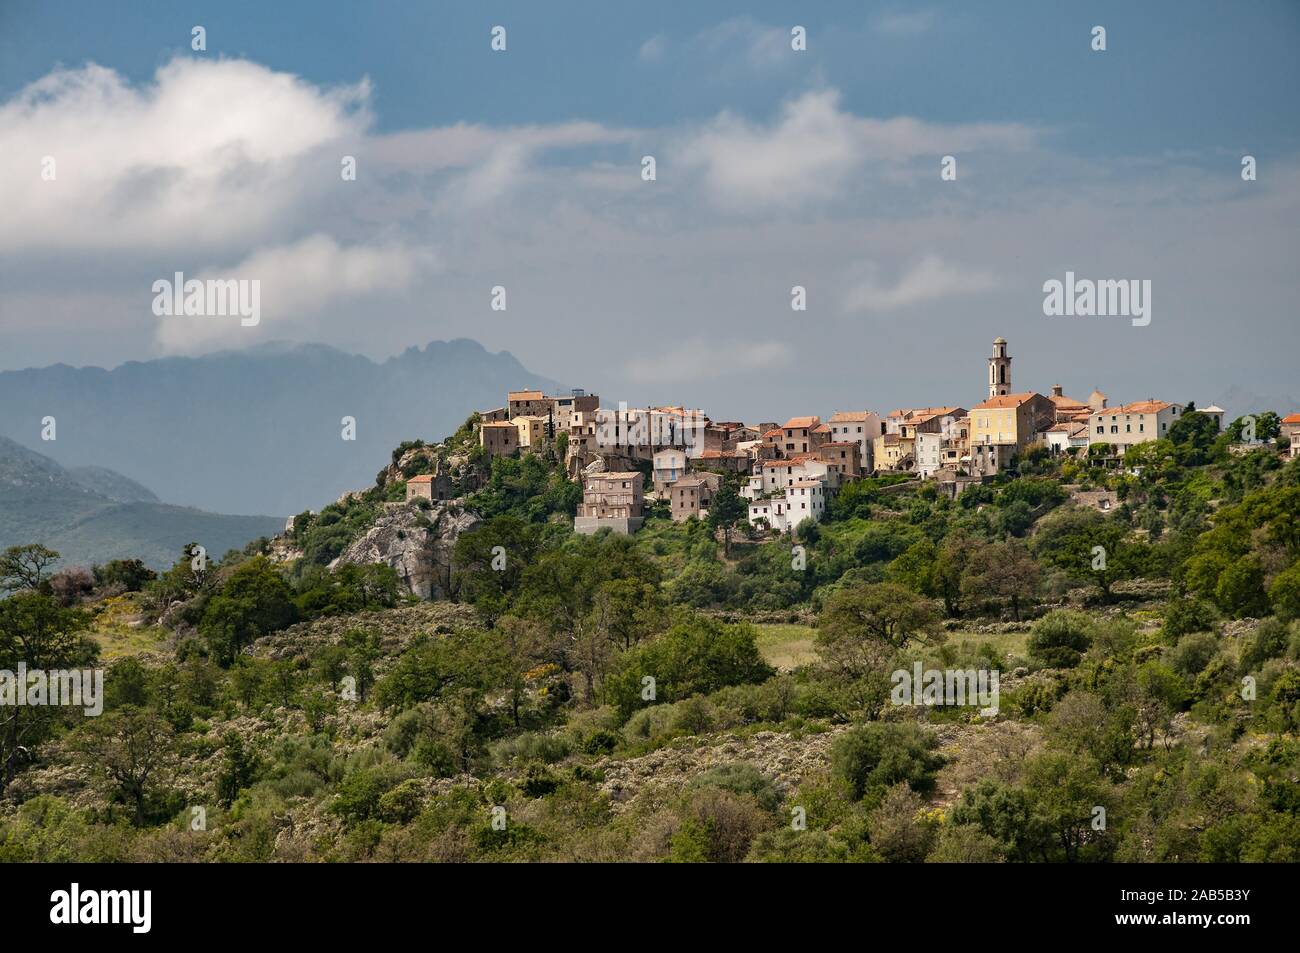 Montemaggiore in the municipality of Montegrosso in the north of Corsica, in the background the Montegrosso massif, France, Europe Stock Photo